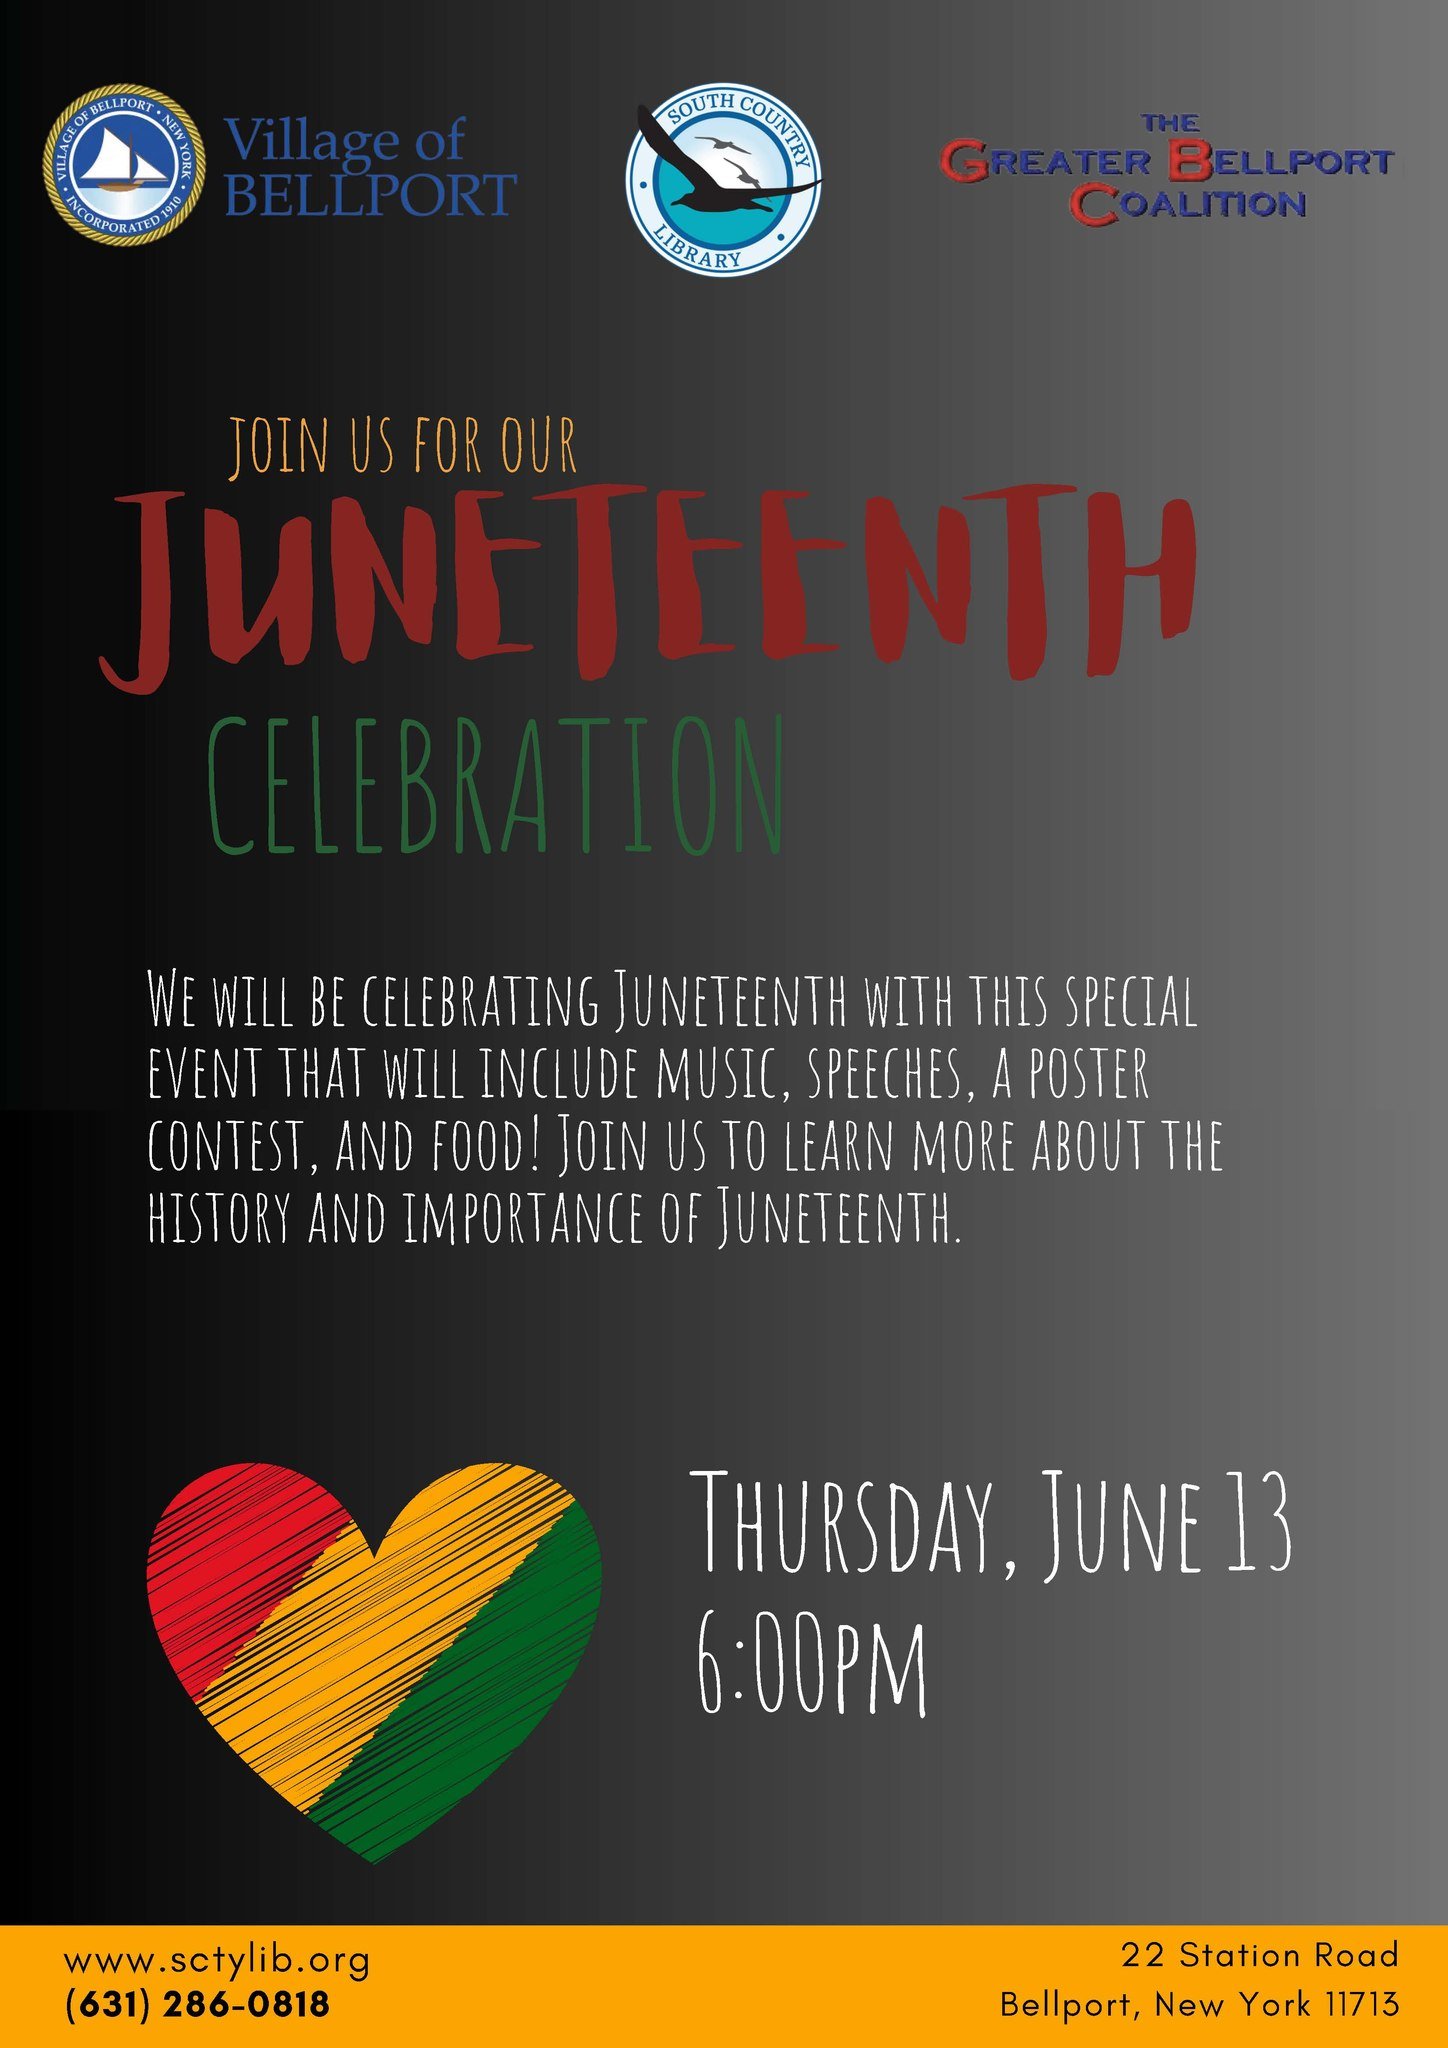 Call to Action! 

Students are invited to submit original, creative posters illustrating the power of unity and the history of Juneteenth.

Students from K through 12 are invited to participate. Students should submit their posters in person to the R